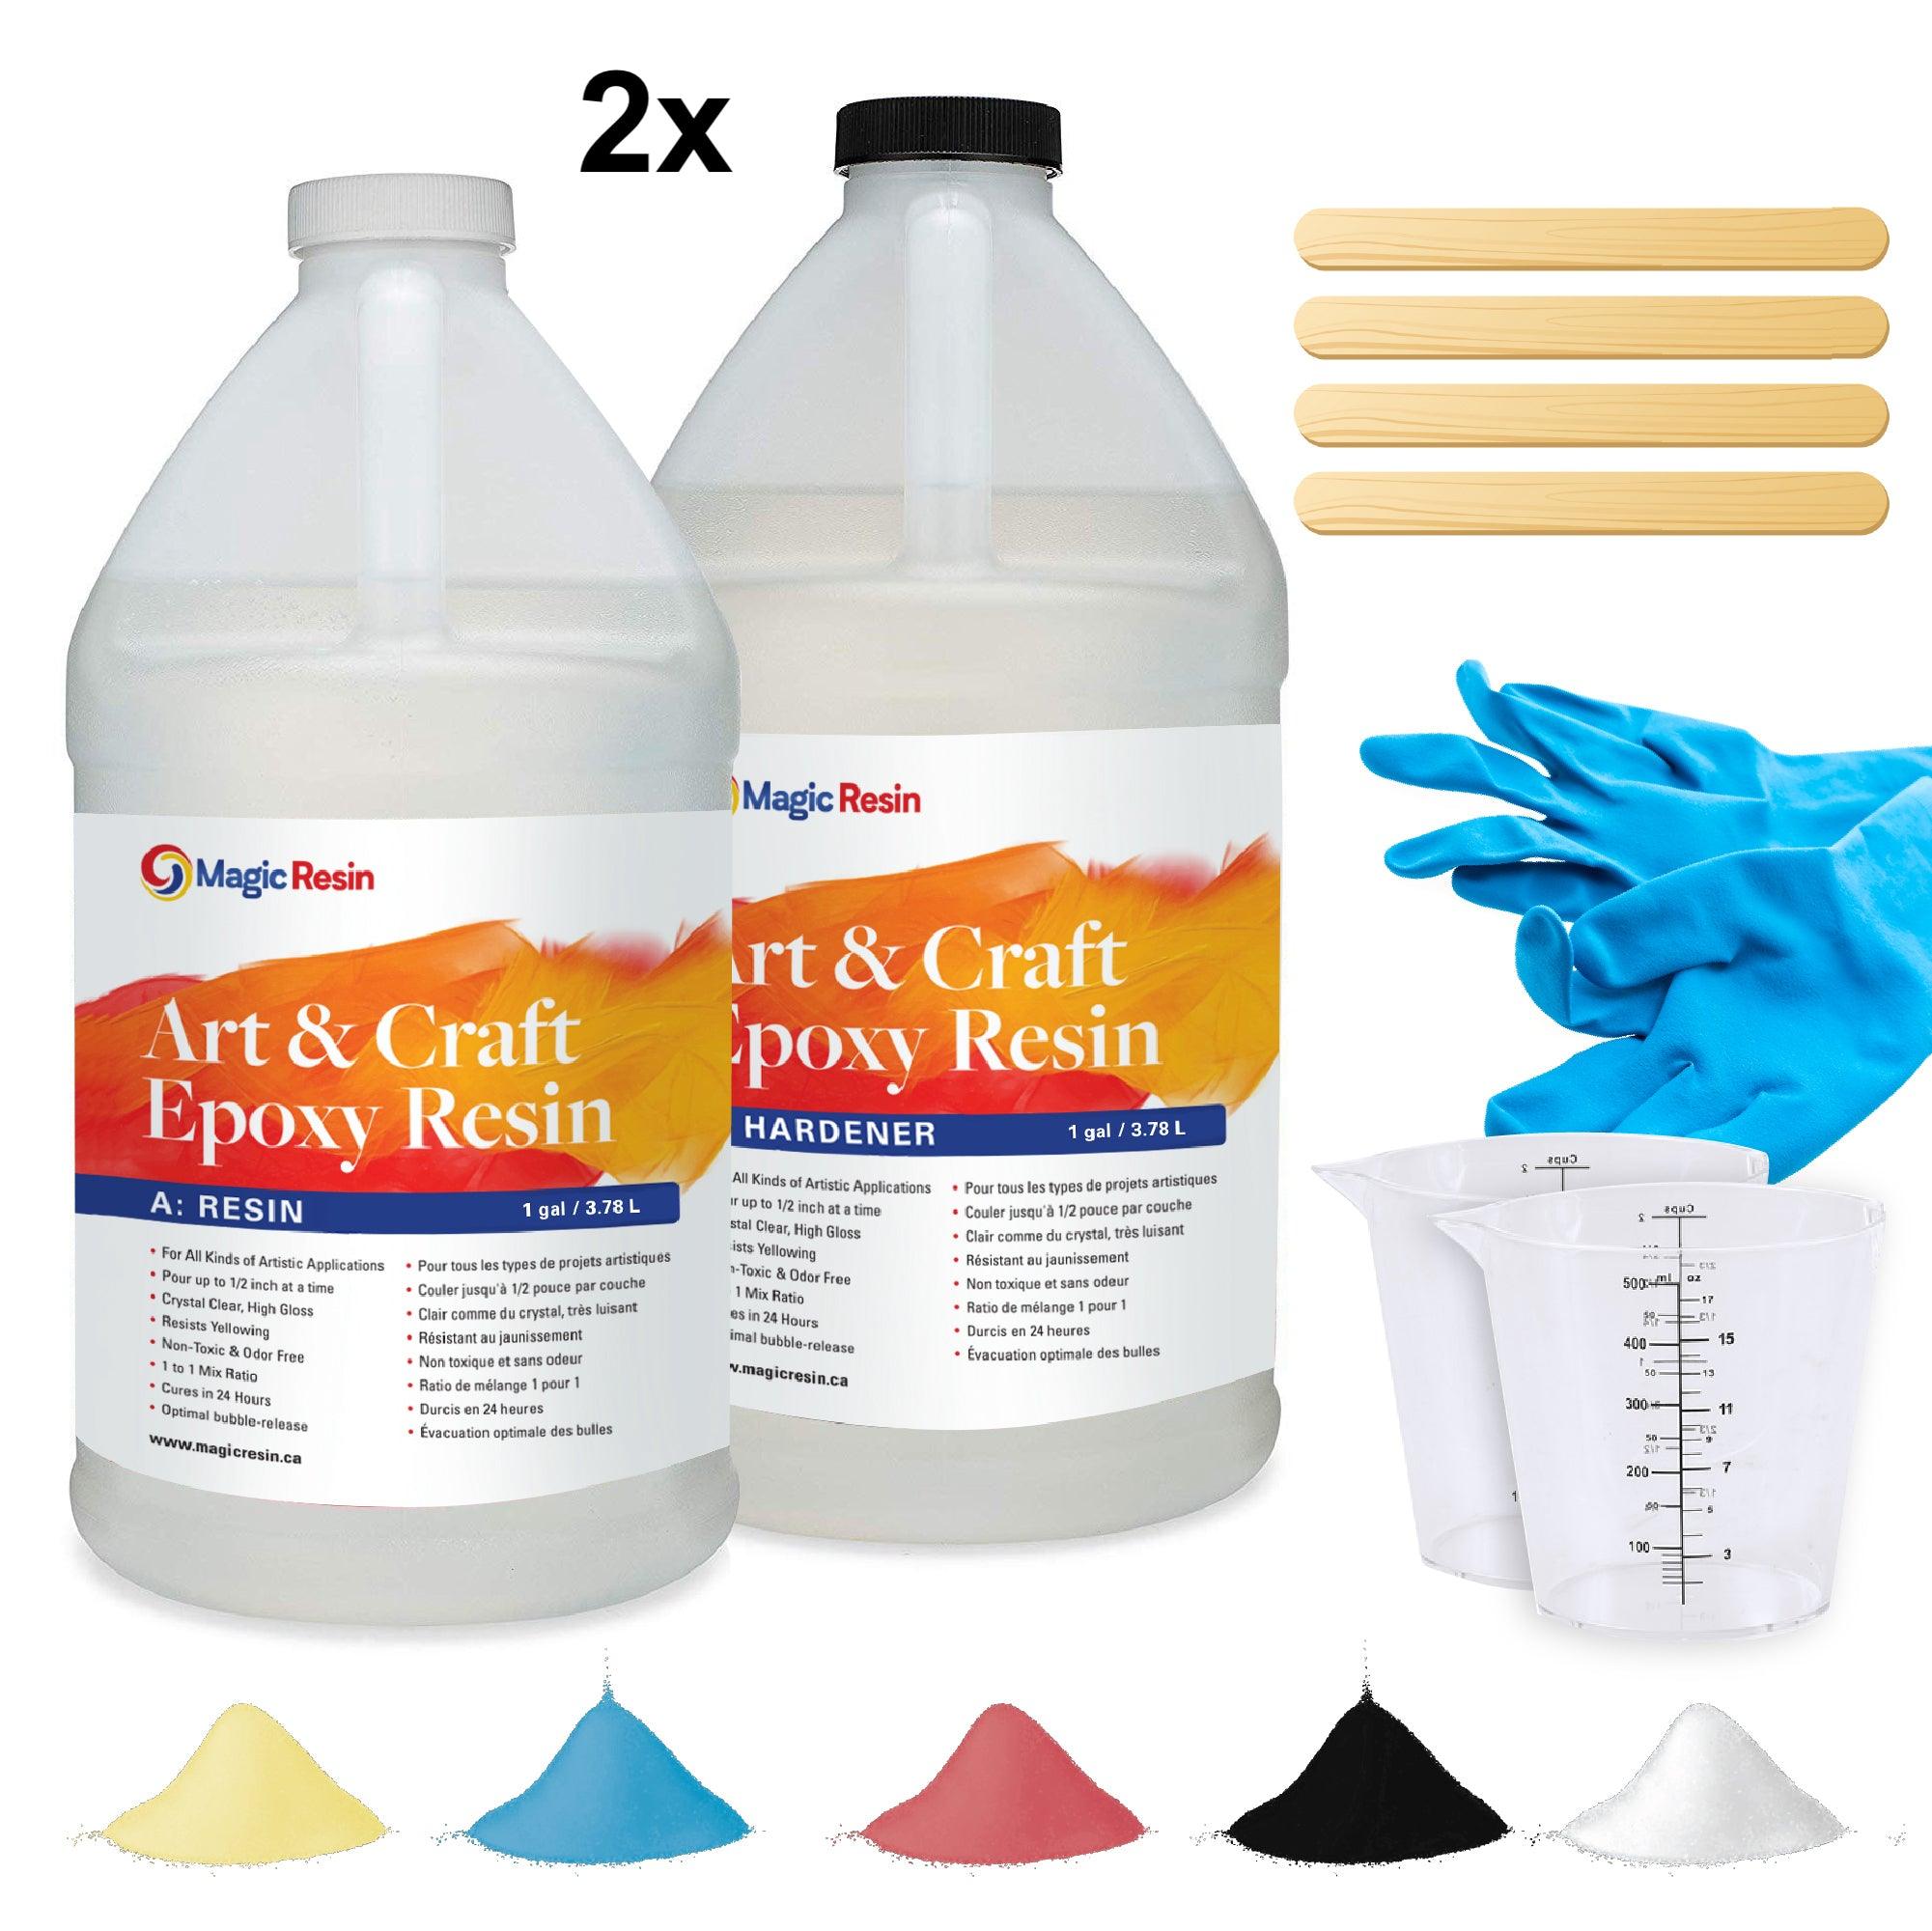 4 Gallon (15.2 L) | Art & Craft Epoxy Resin Kit | Includes 6 Pairs of Gloves, 4 Cups, 8 Sticks & 10 X 5G Mica Powder Bags | Free Express Shipping - Magic Resin USA